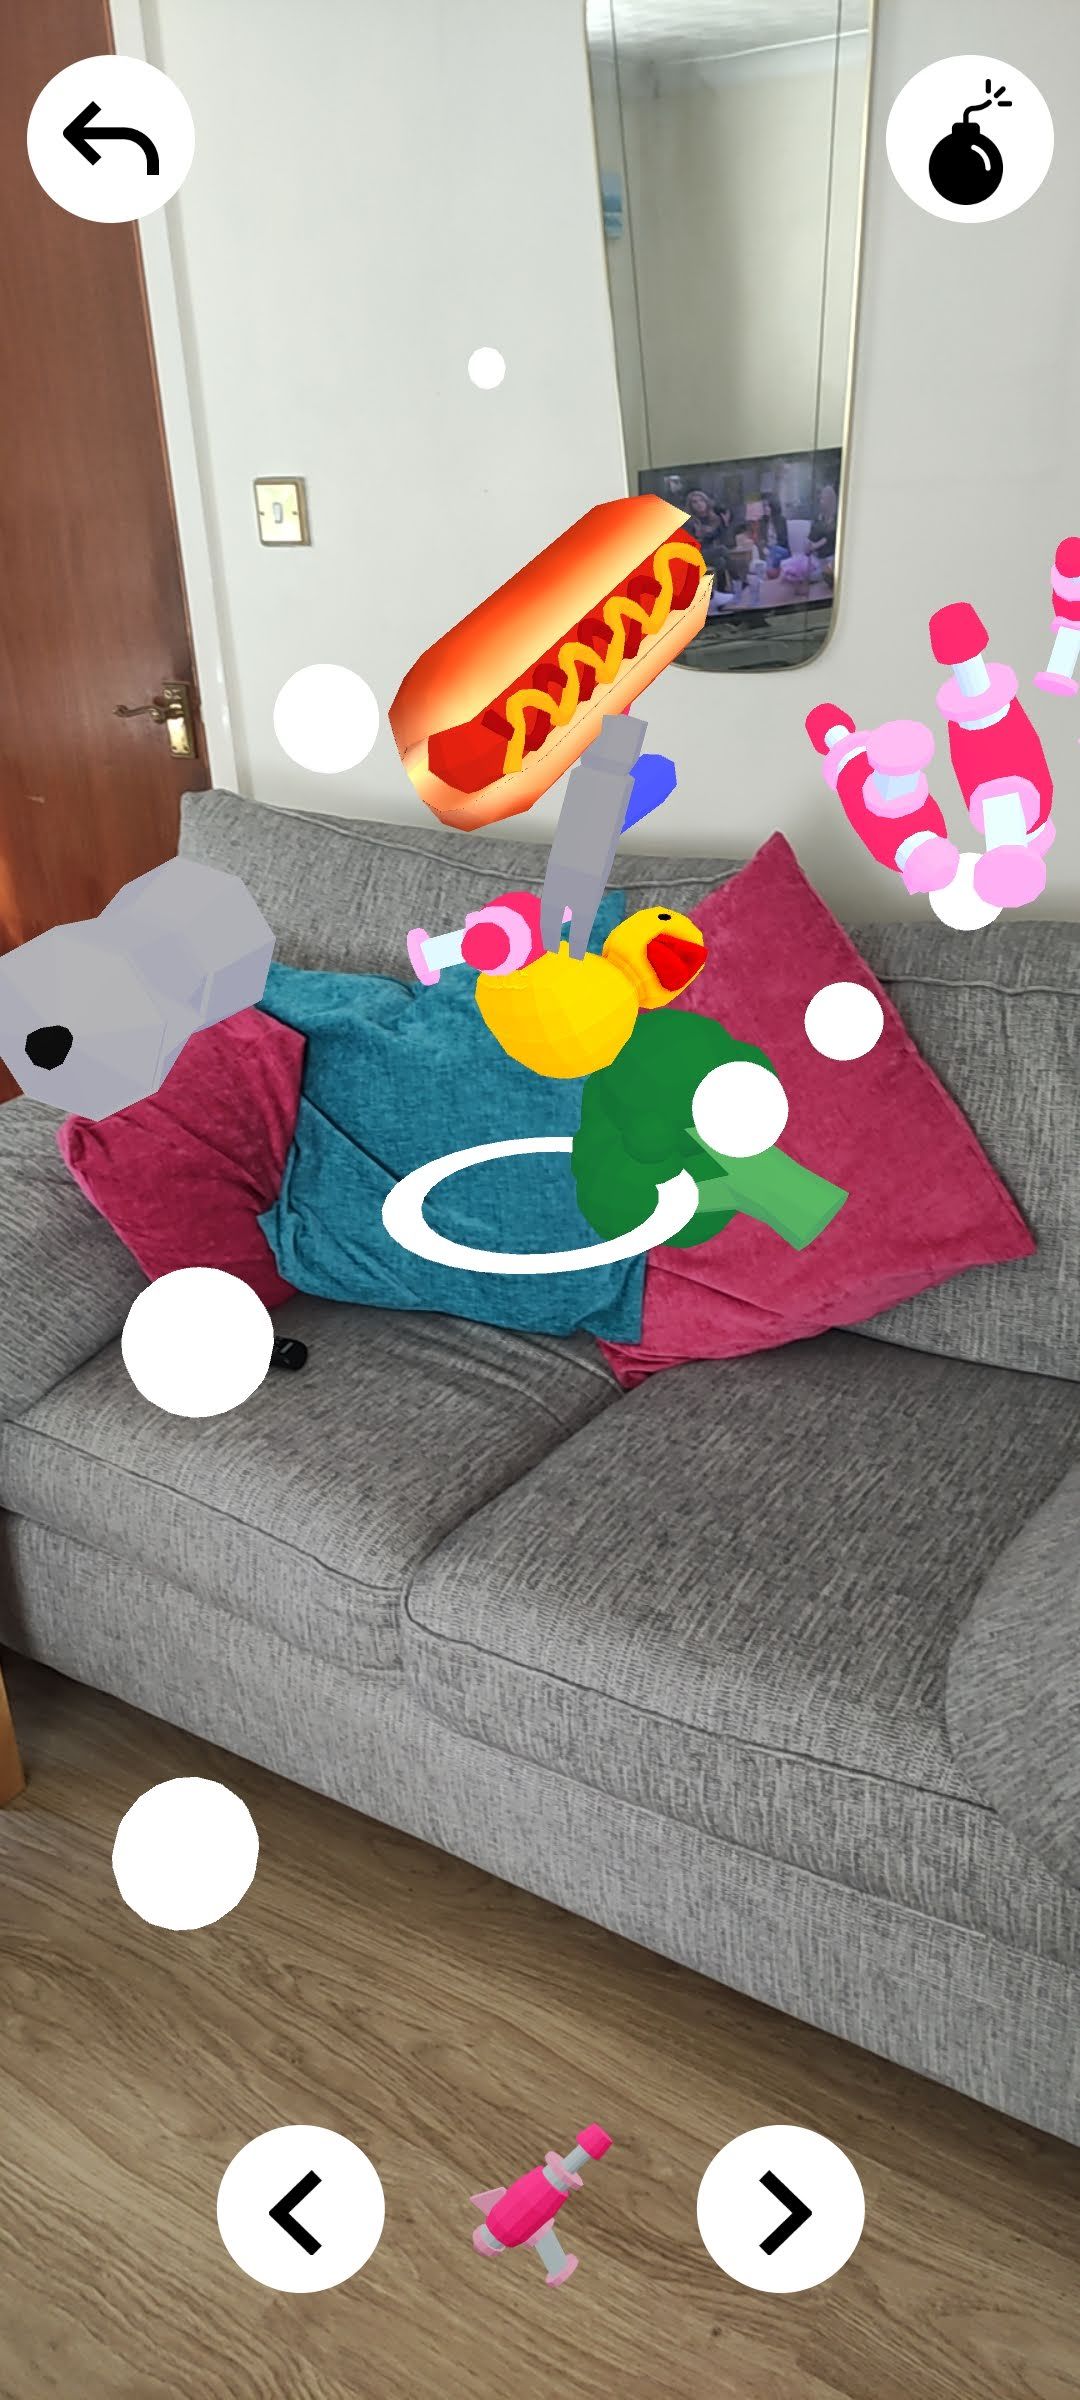 Bouncing Band dropping items on couch